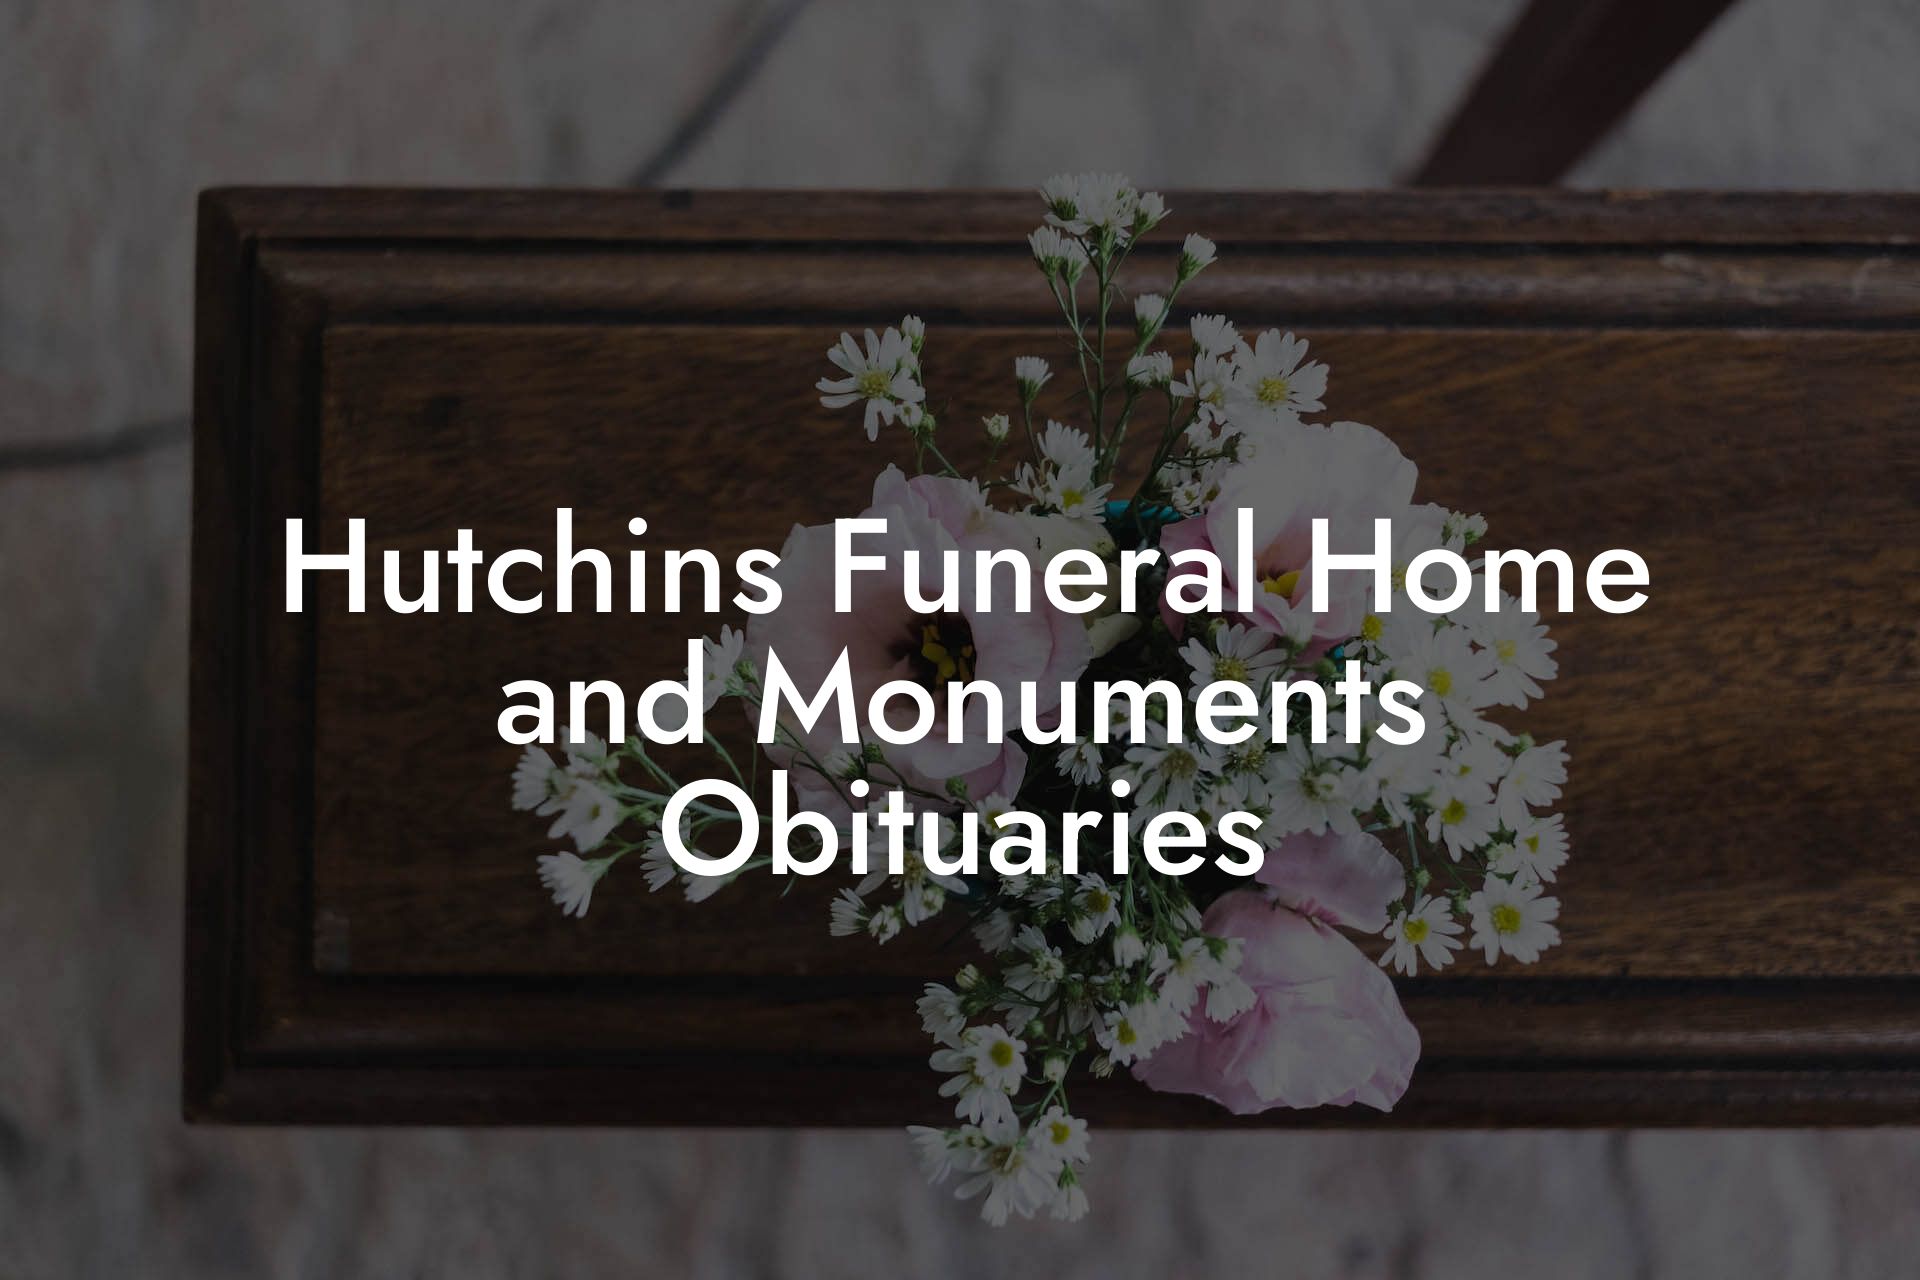 Hutchins Funeral Home and Monuments Obituaries